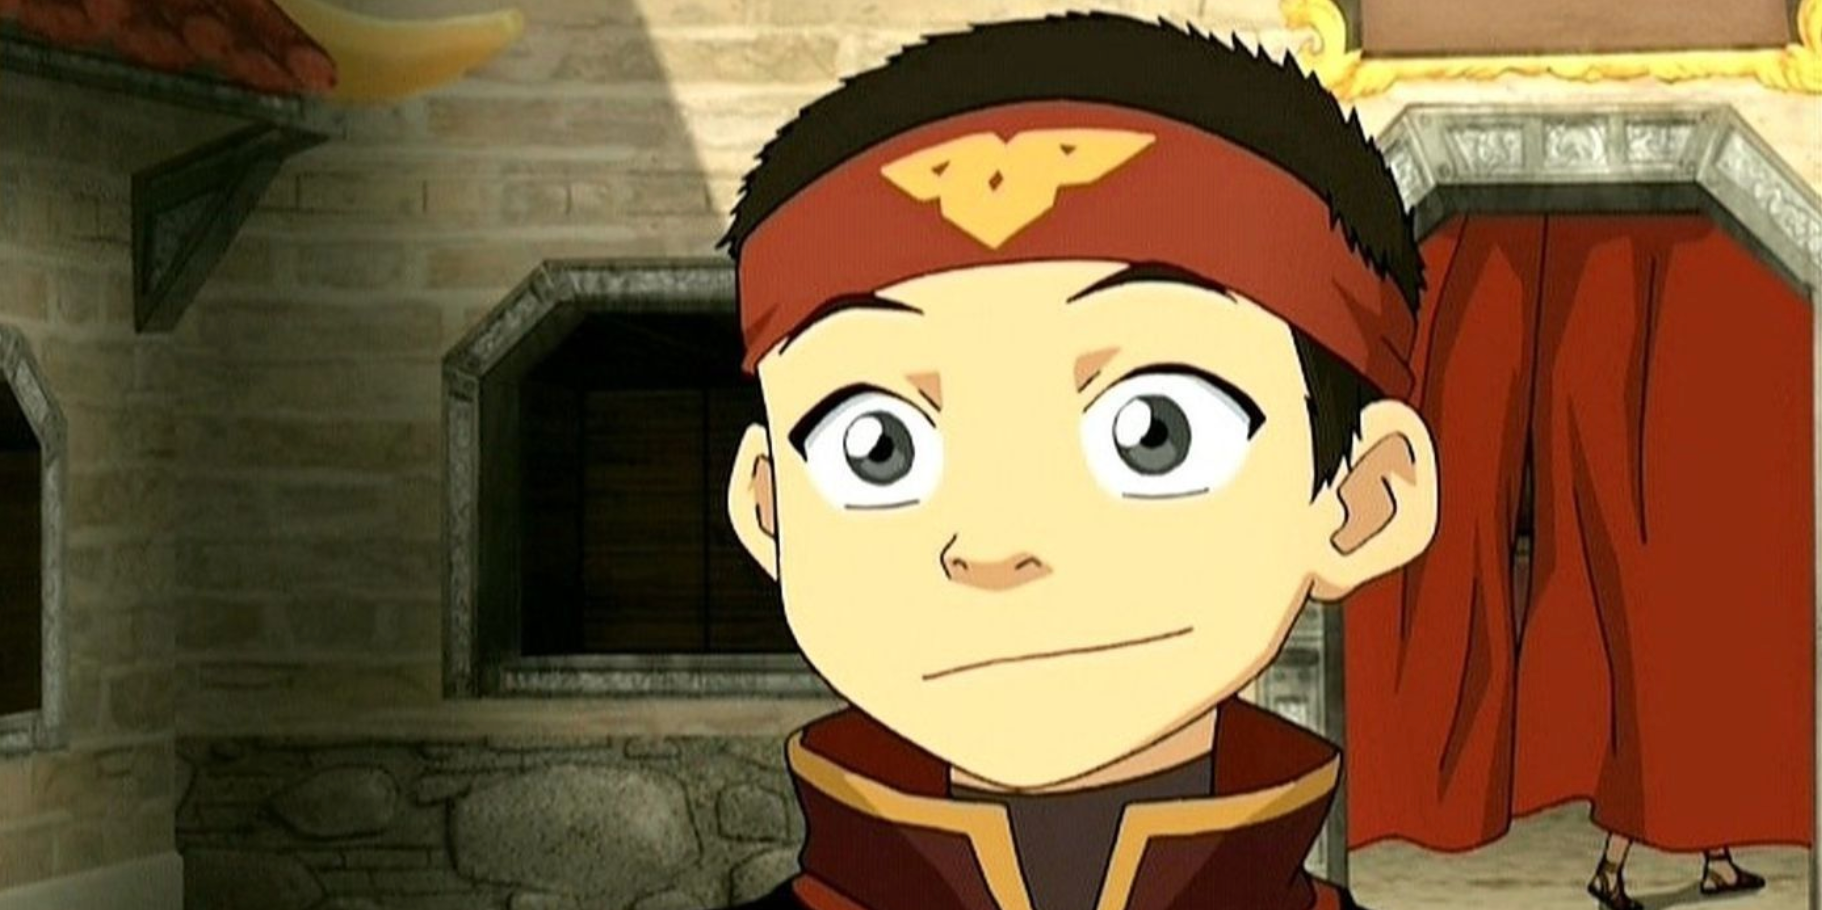 Aang from Avatar the last airbender smiling